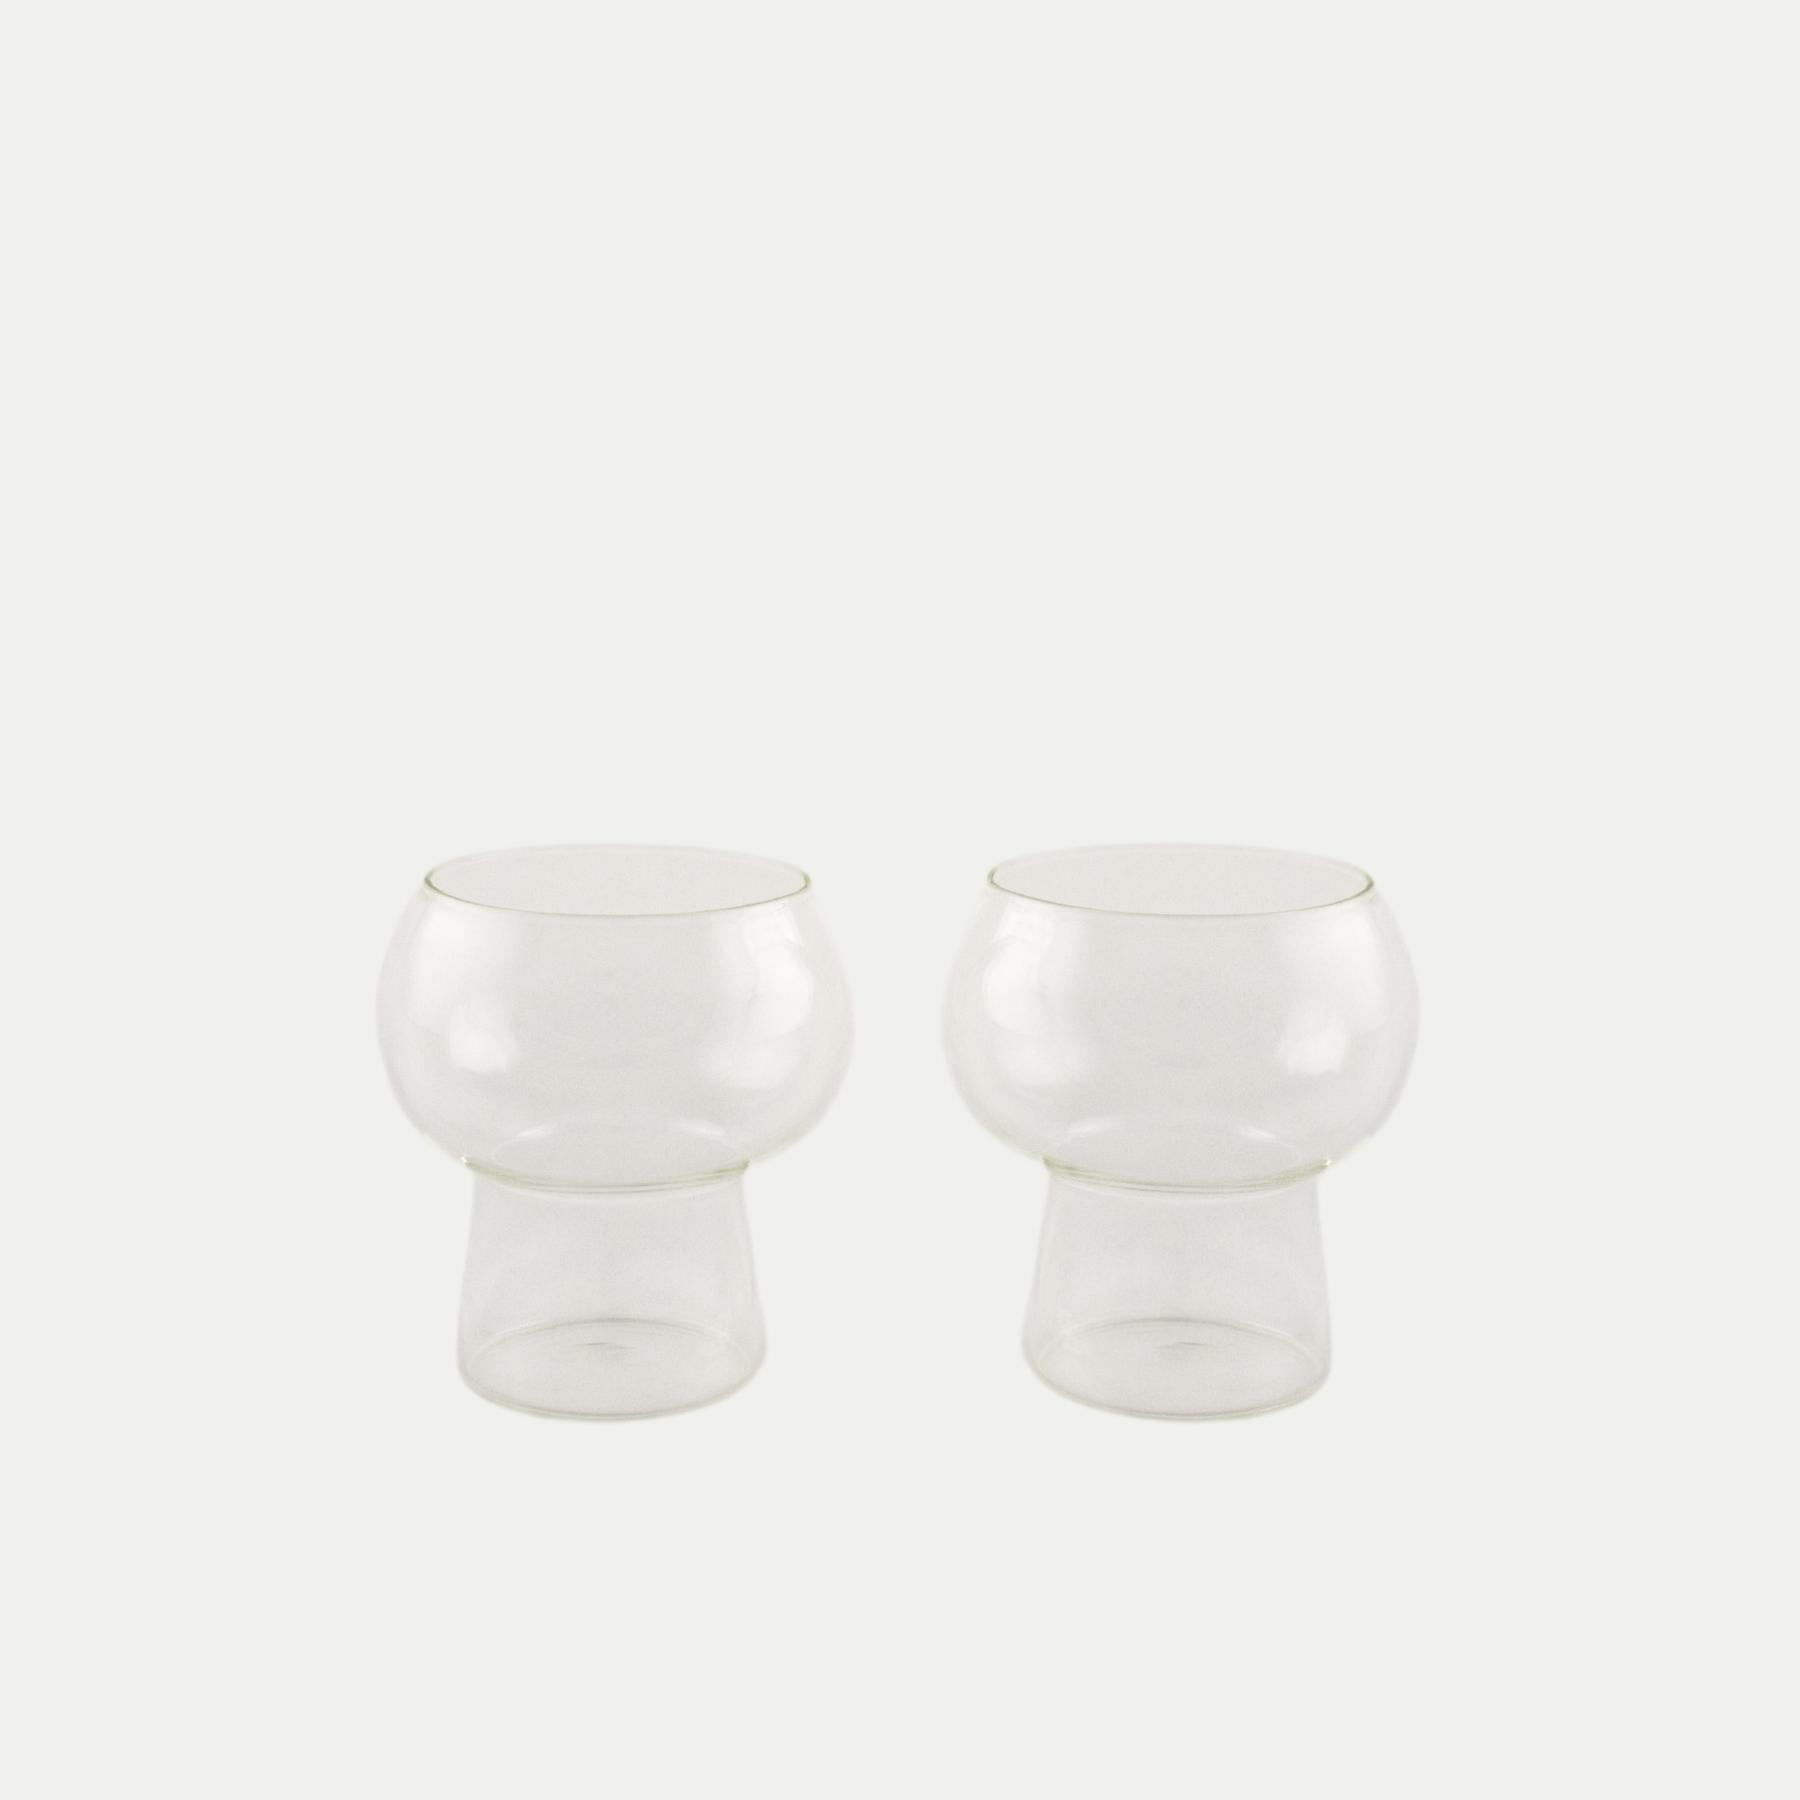 Coco and Henry clear Marnie wine glasses stemless standing side by side, made from borosilicate glass